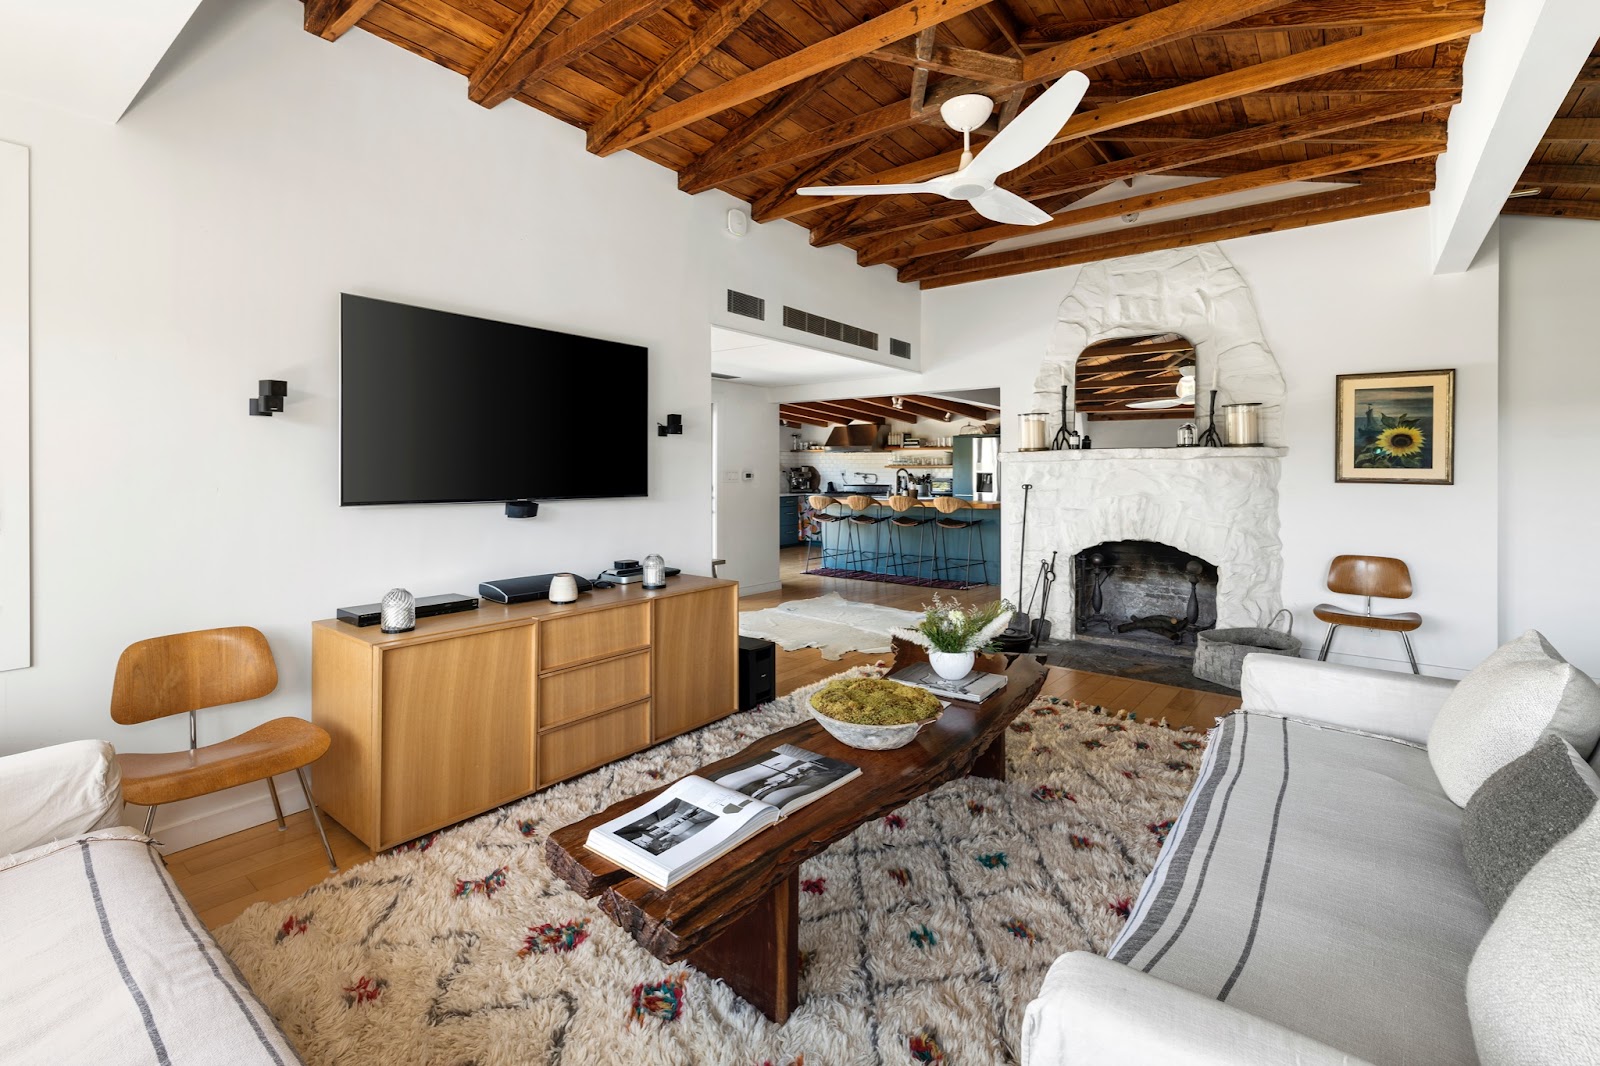 Introducing Topanga Canyon, a mid-century modern hillside hideaway that Exudes West Coast Luxury. This short-term rental is available at Open Air Homes and Airbnb.